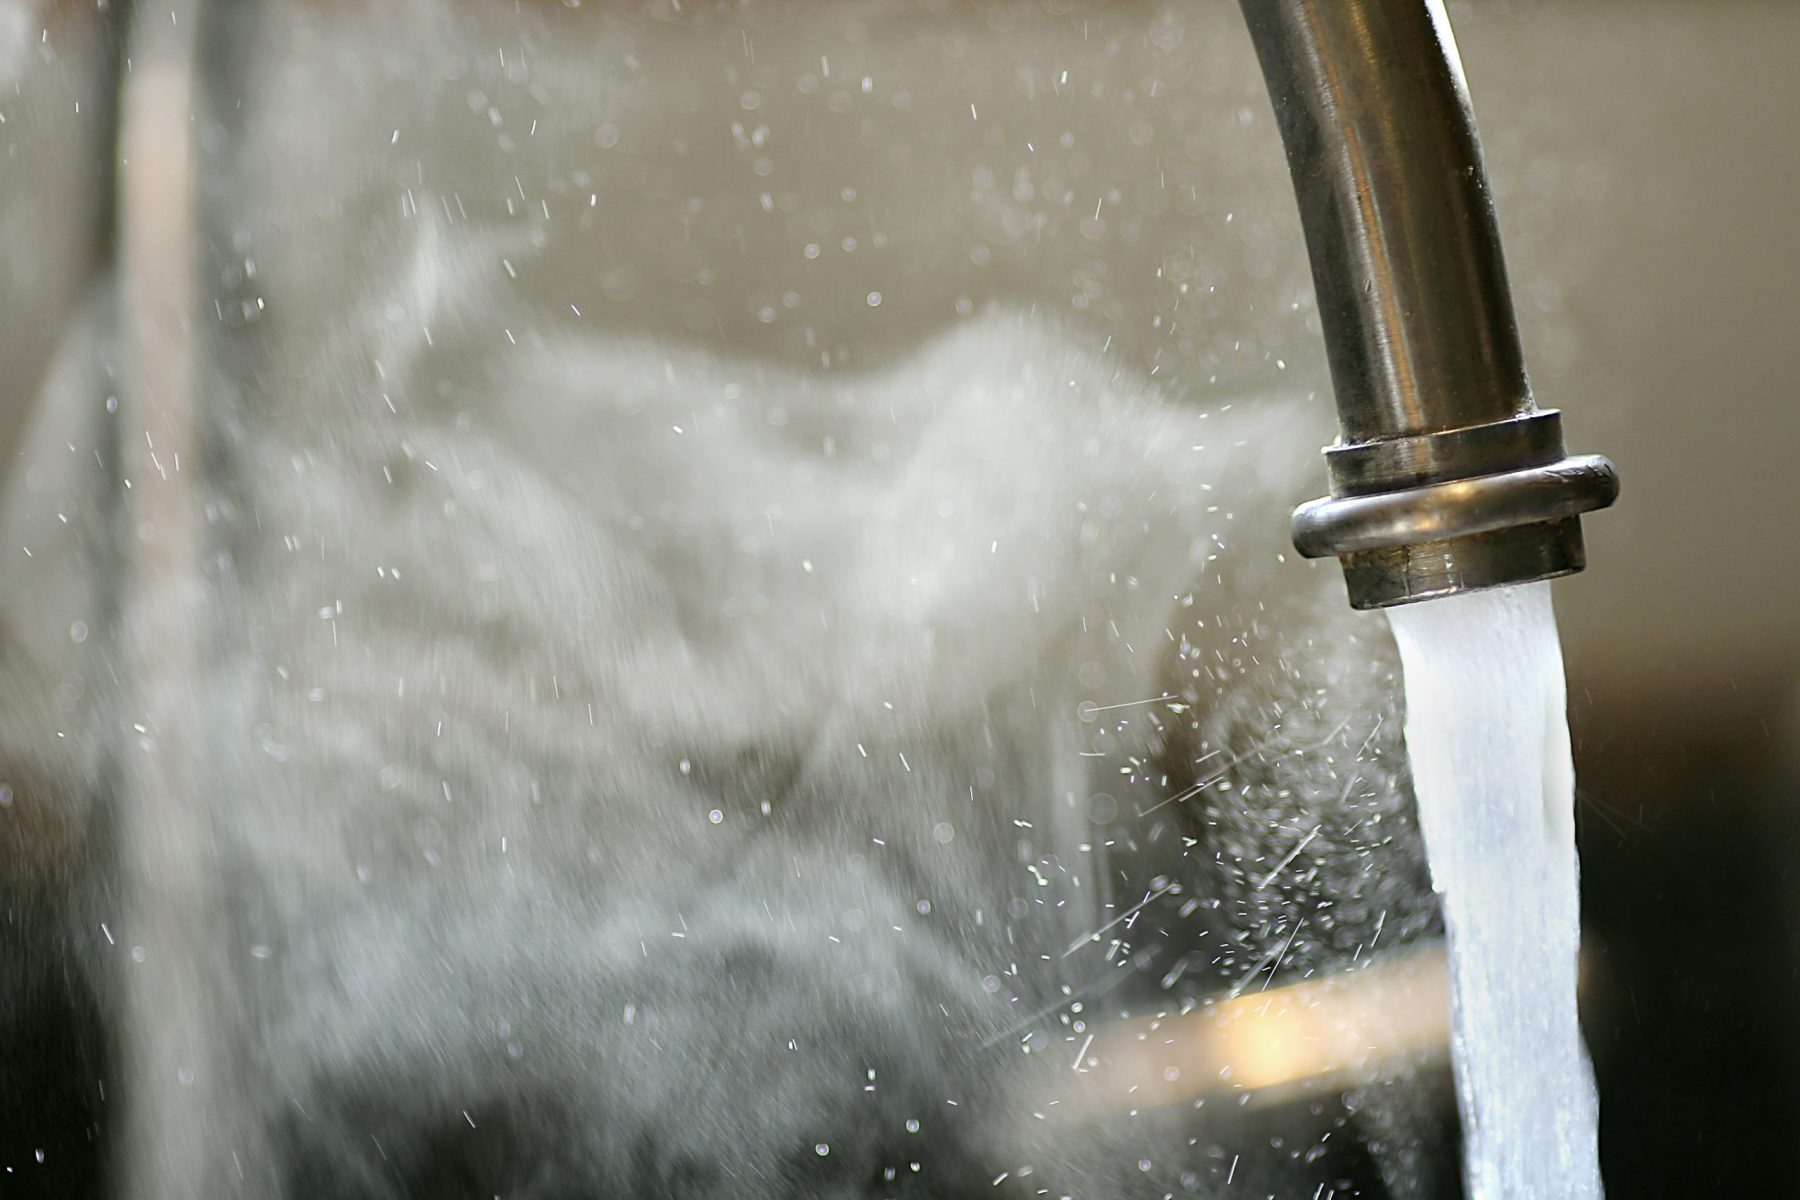 Hot steaming running tap water is pouring out of a stainless steel kitchen faucet.